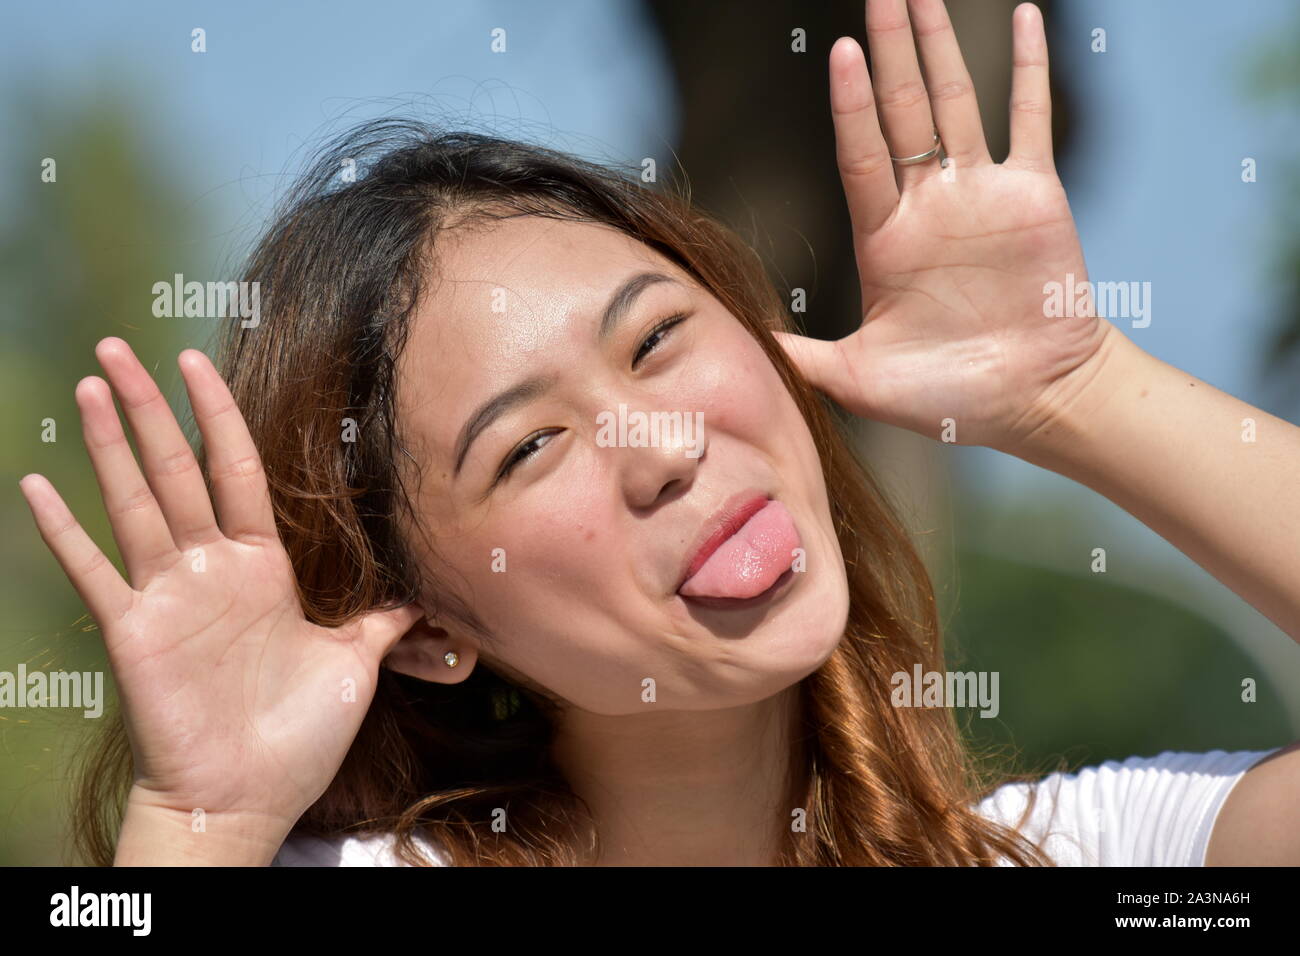 Woman Making Funny Faces Stock Photo